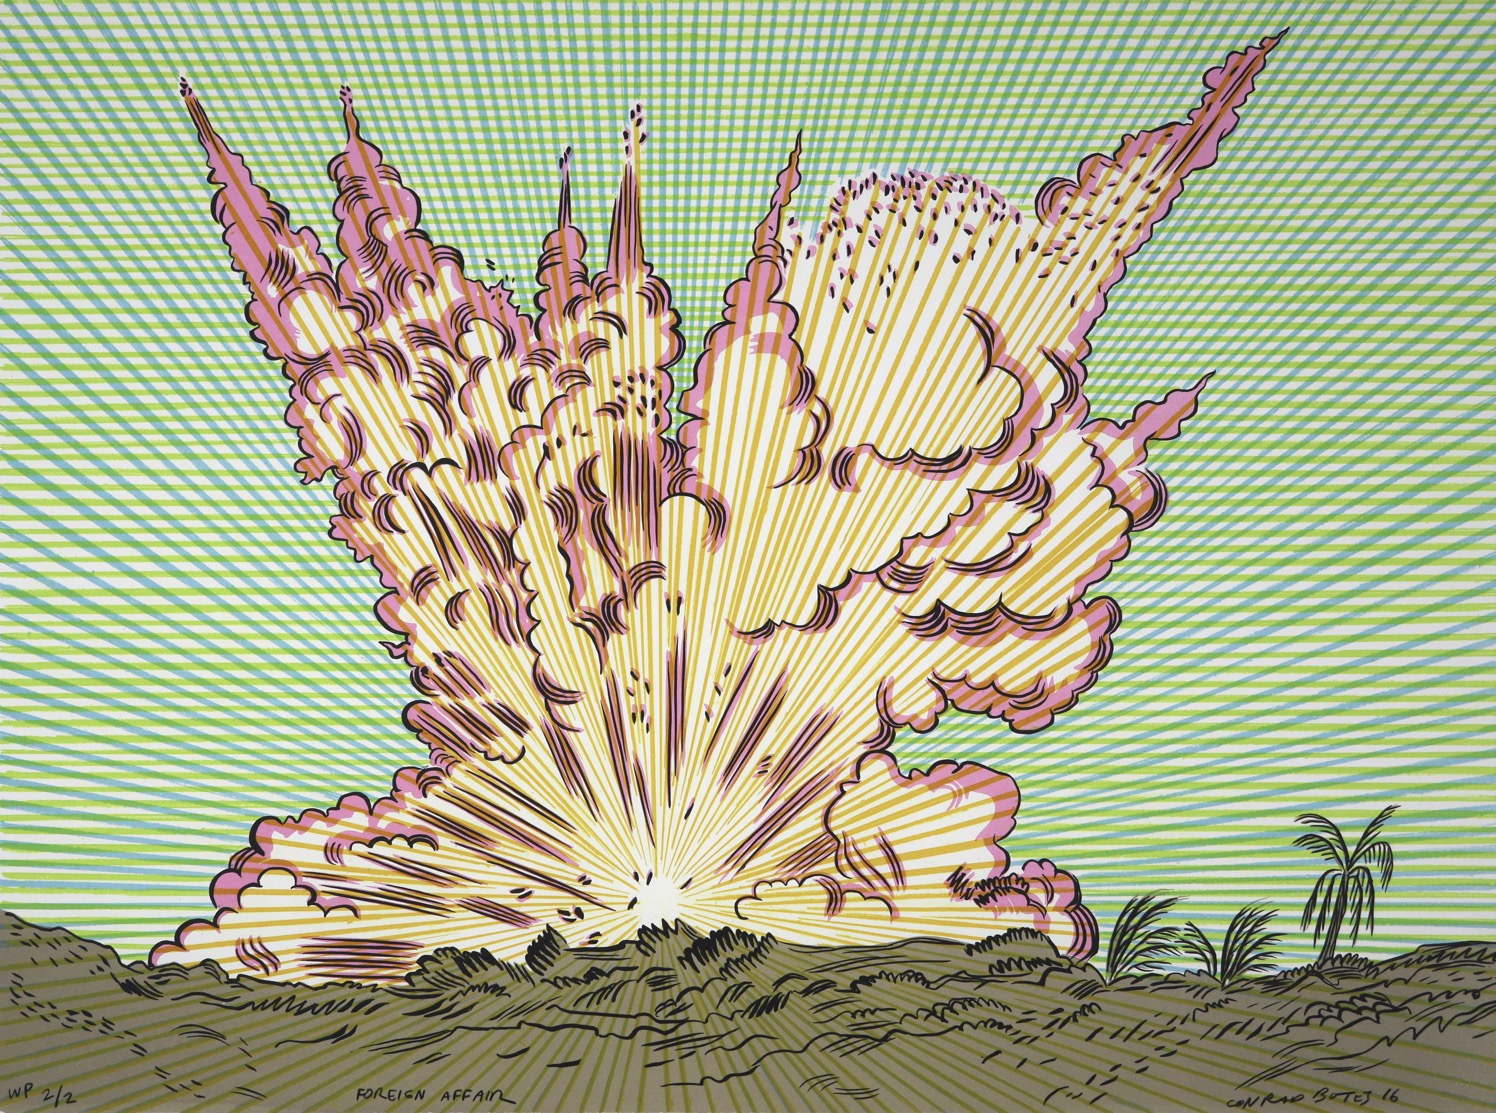 Comic style depiction of an explosion on the horizon of a tropical lanscape